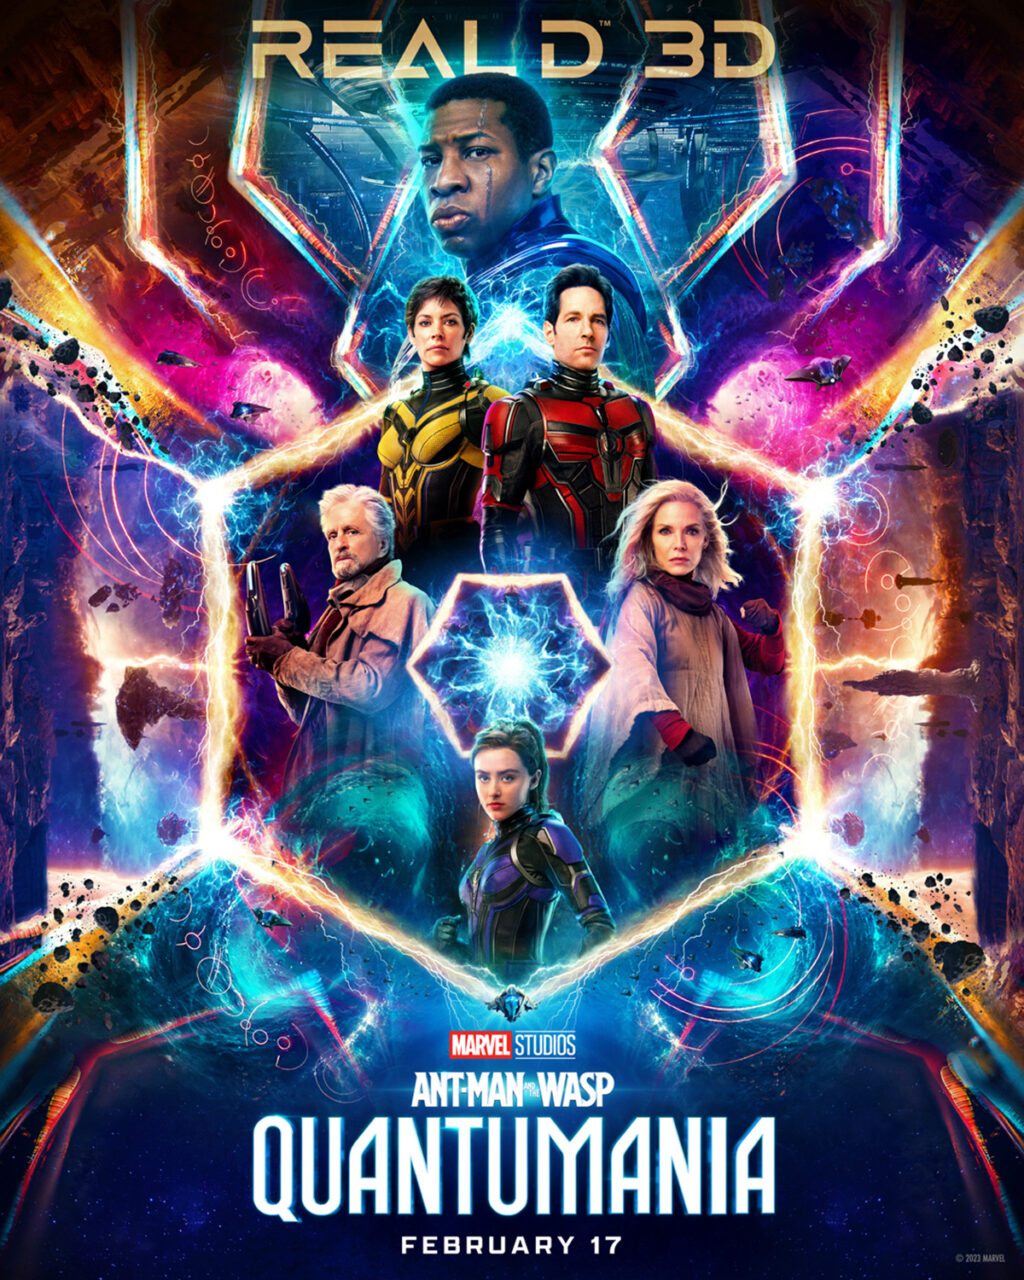 Ant-Man And The Wasp: Quantumania poster (Marvel Studios)